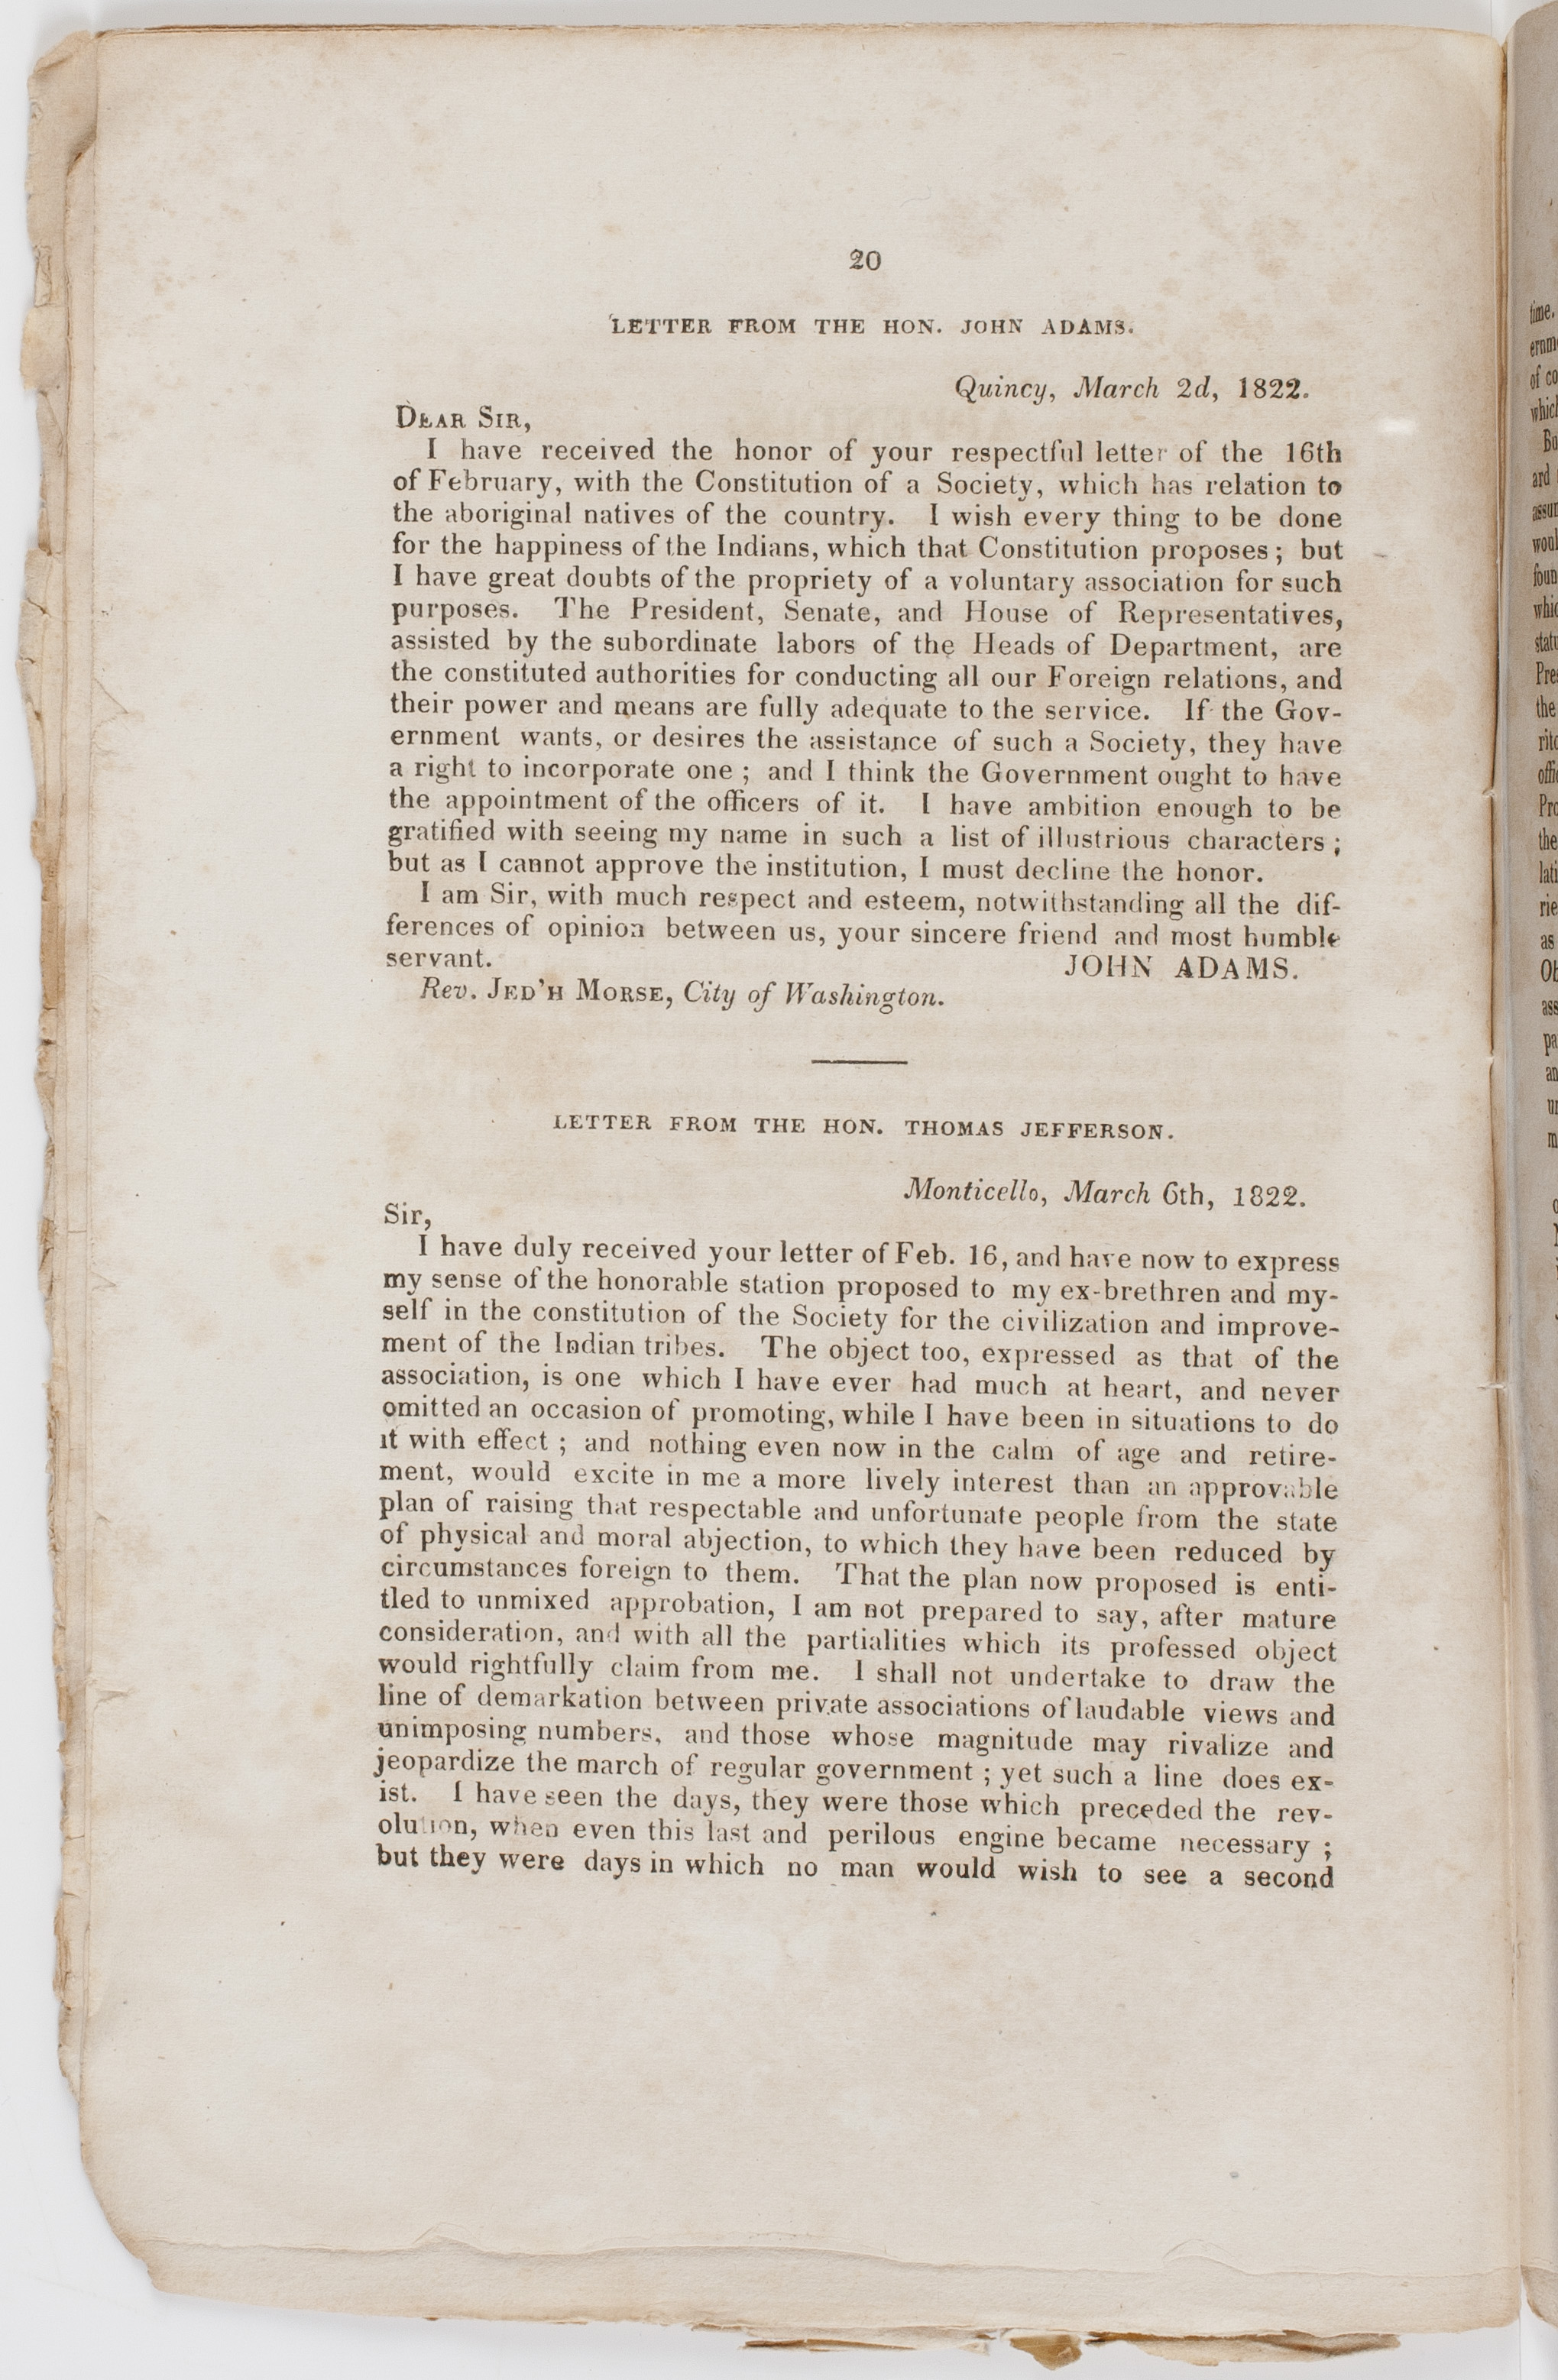 A Letter from Thomas Jefferson on the Plight of Native Americans